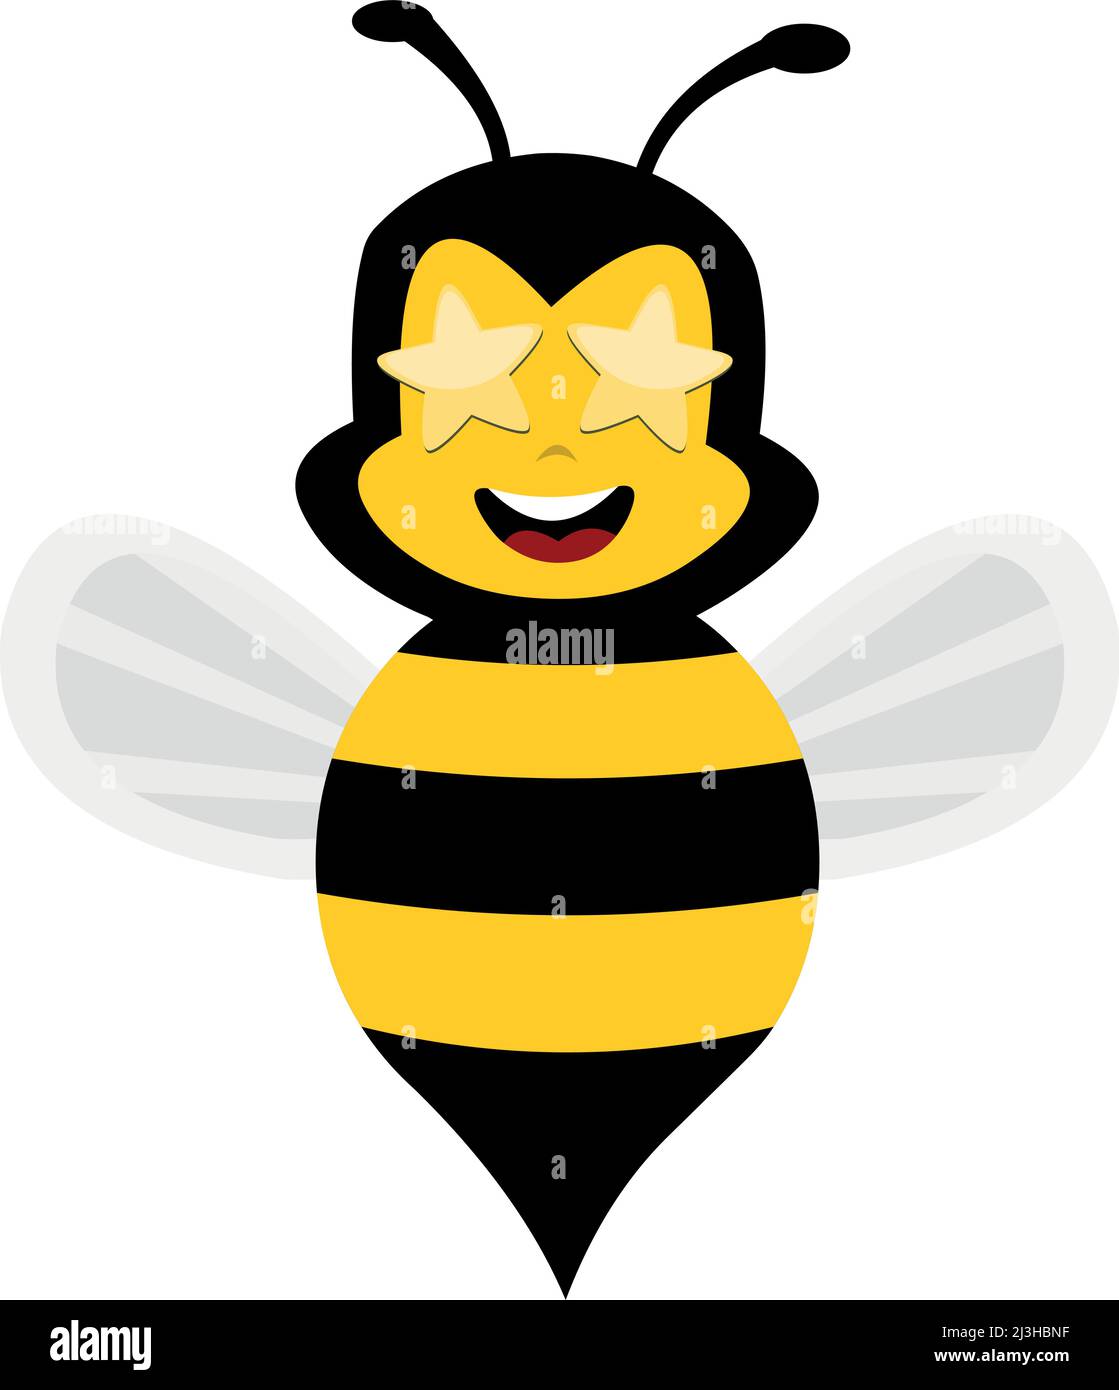 Vector character illustration of a cartoon bee with eyes in the form of stars Stock Vector